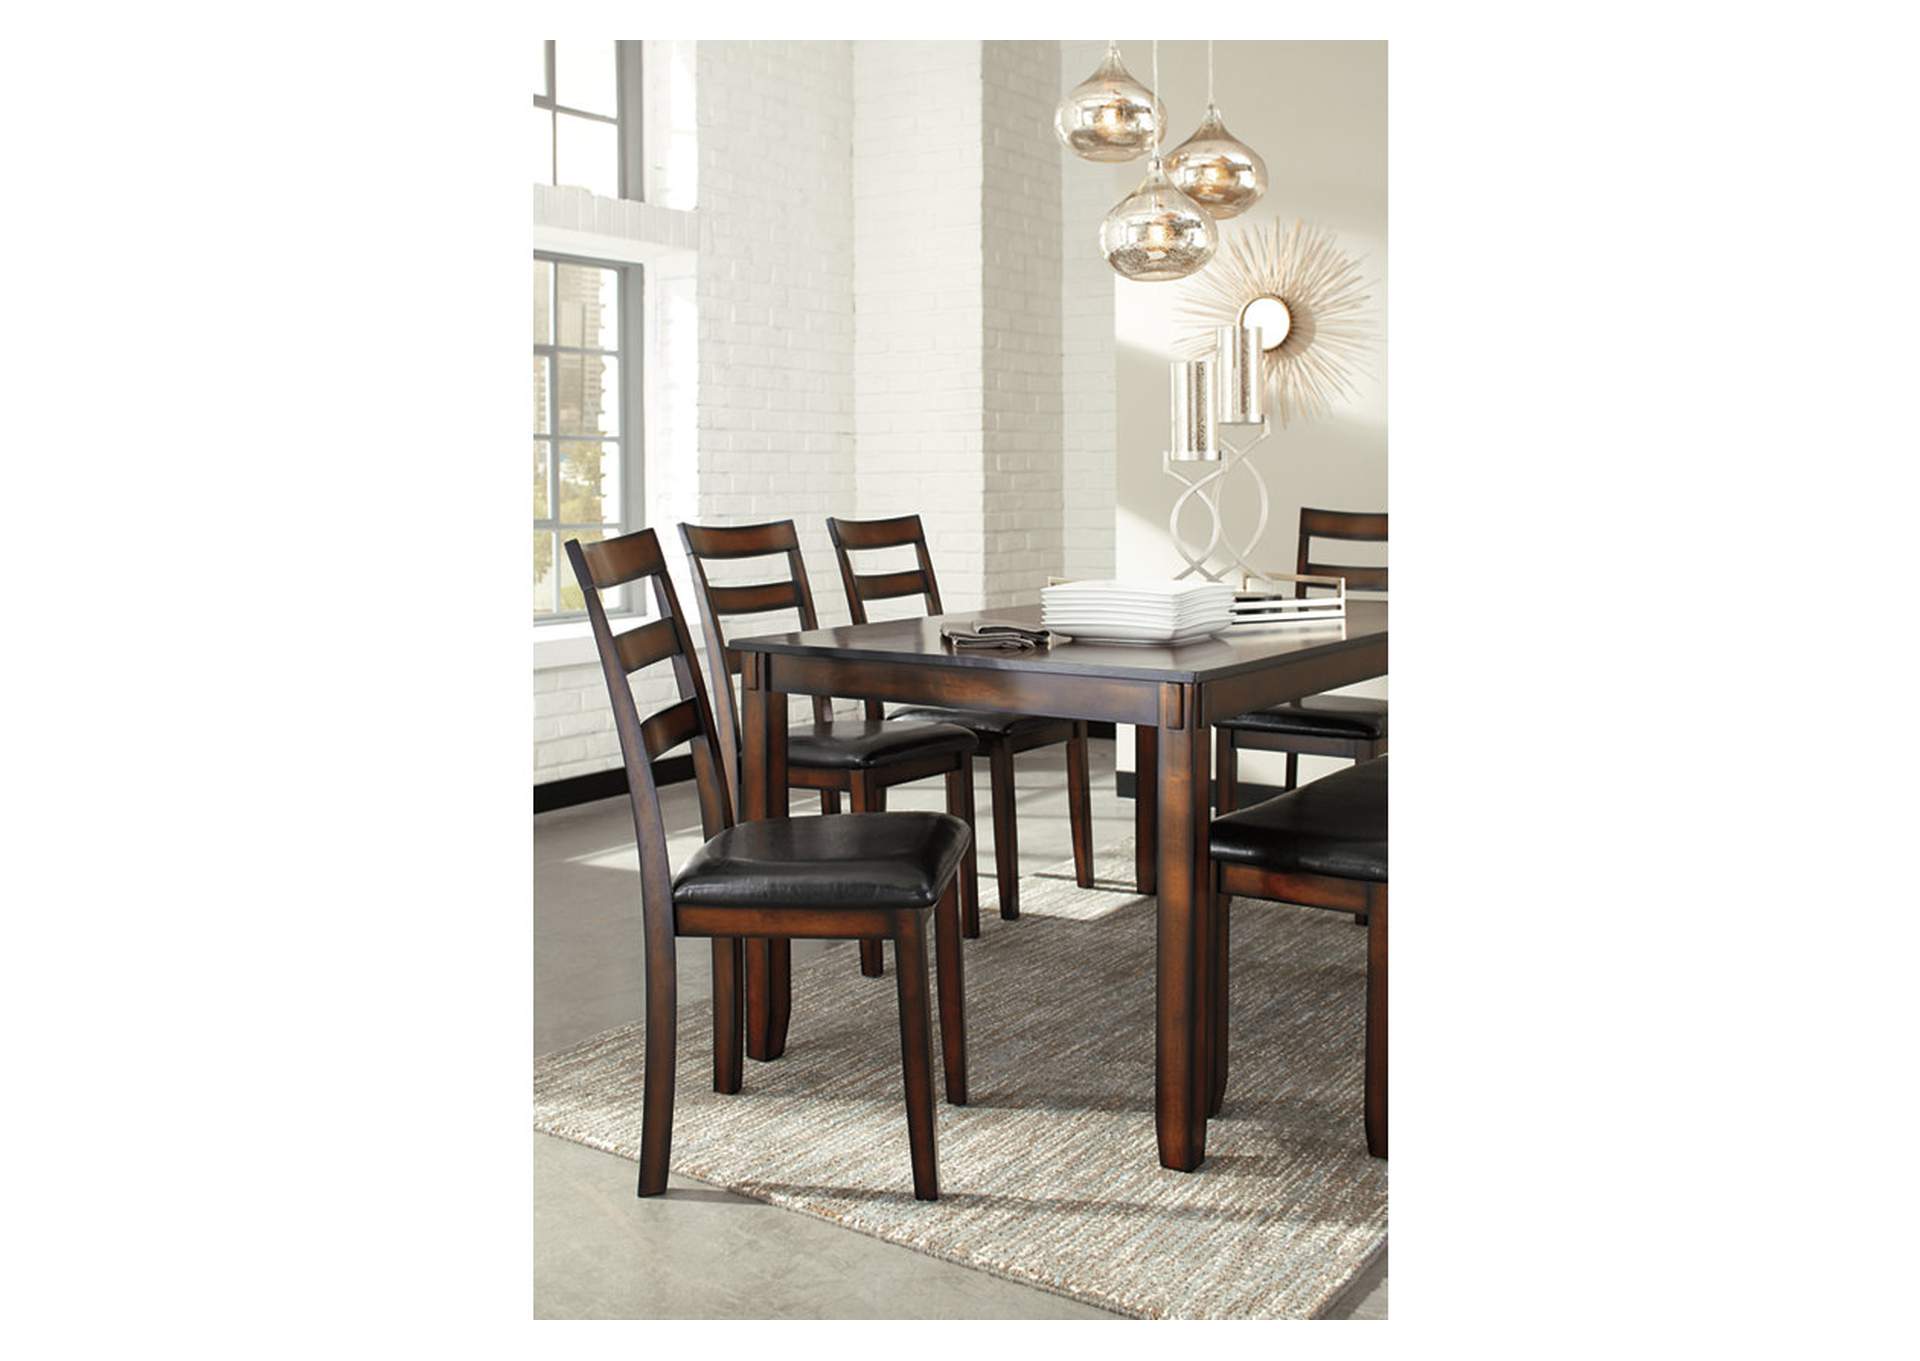 Coviar Dining Room Table And Chairs, Coviar Dining Room Table And Chairs With Bench Set Of 6